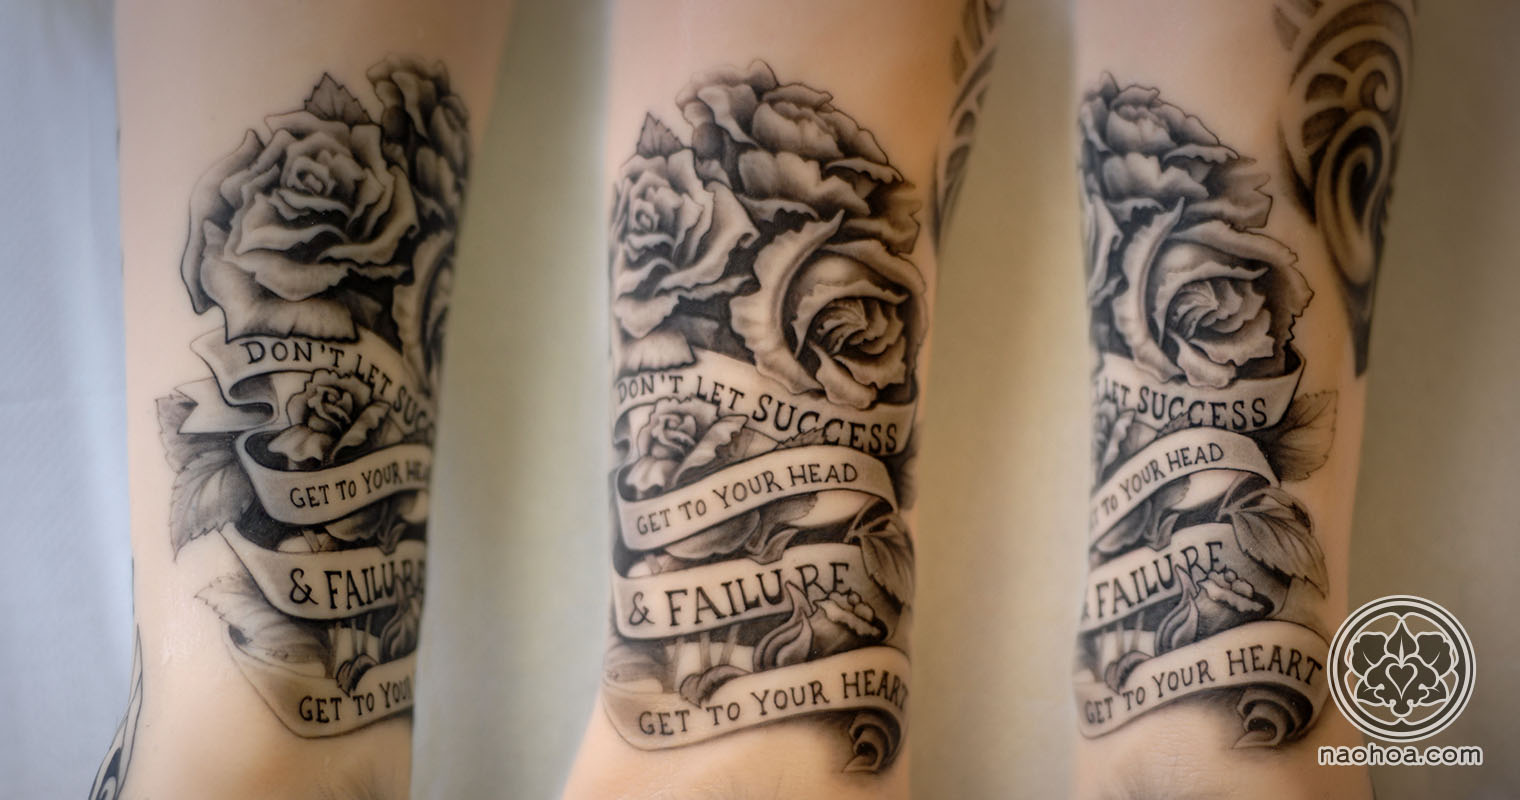 Black & white tattoo of a bunch of roses and the quote, "Don't let success get to your head & failure get to your heart". Design & tattooed by Naomi Hoang at NAOHOA.